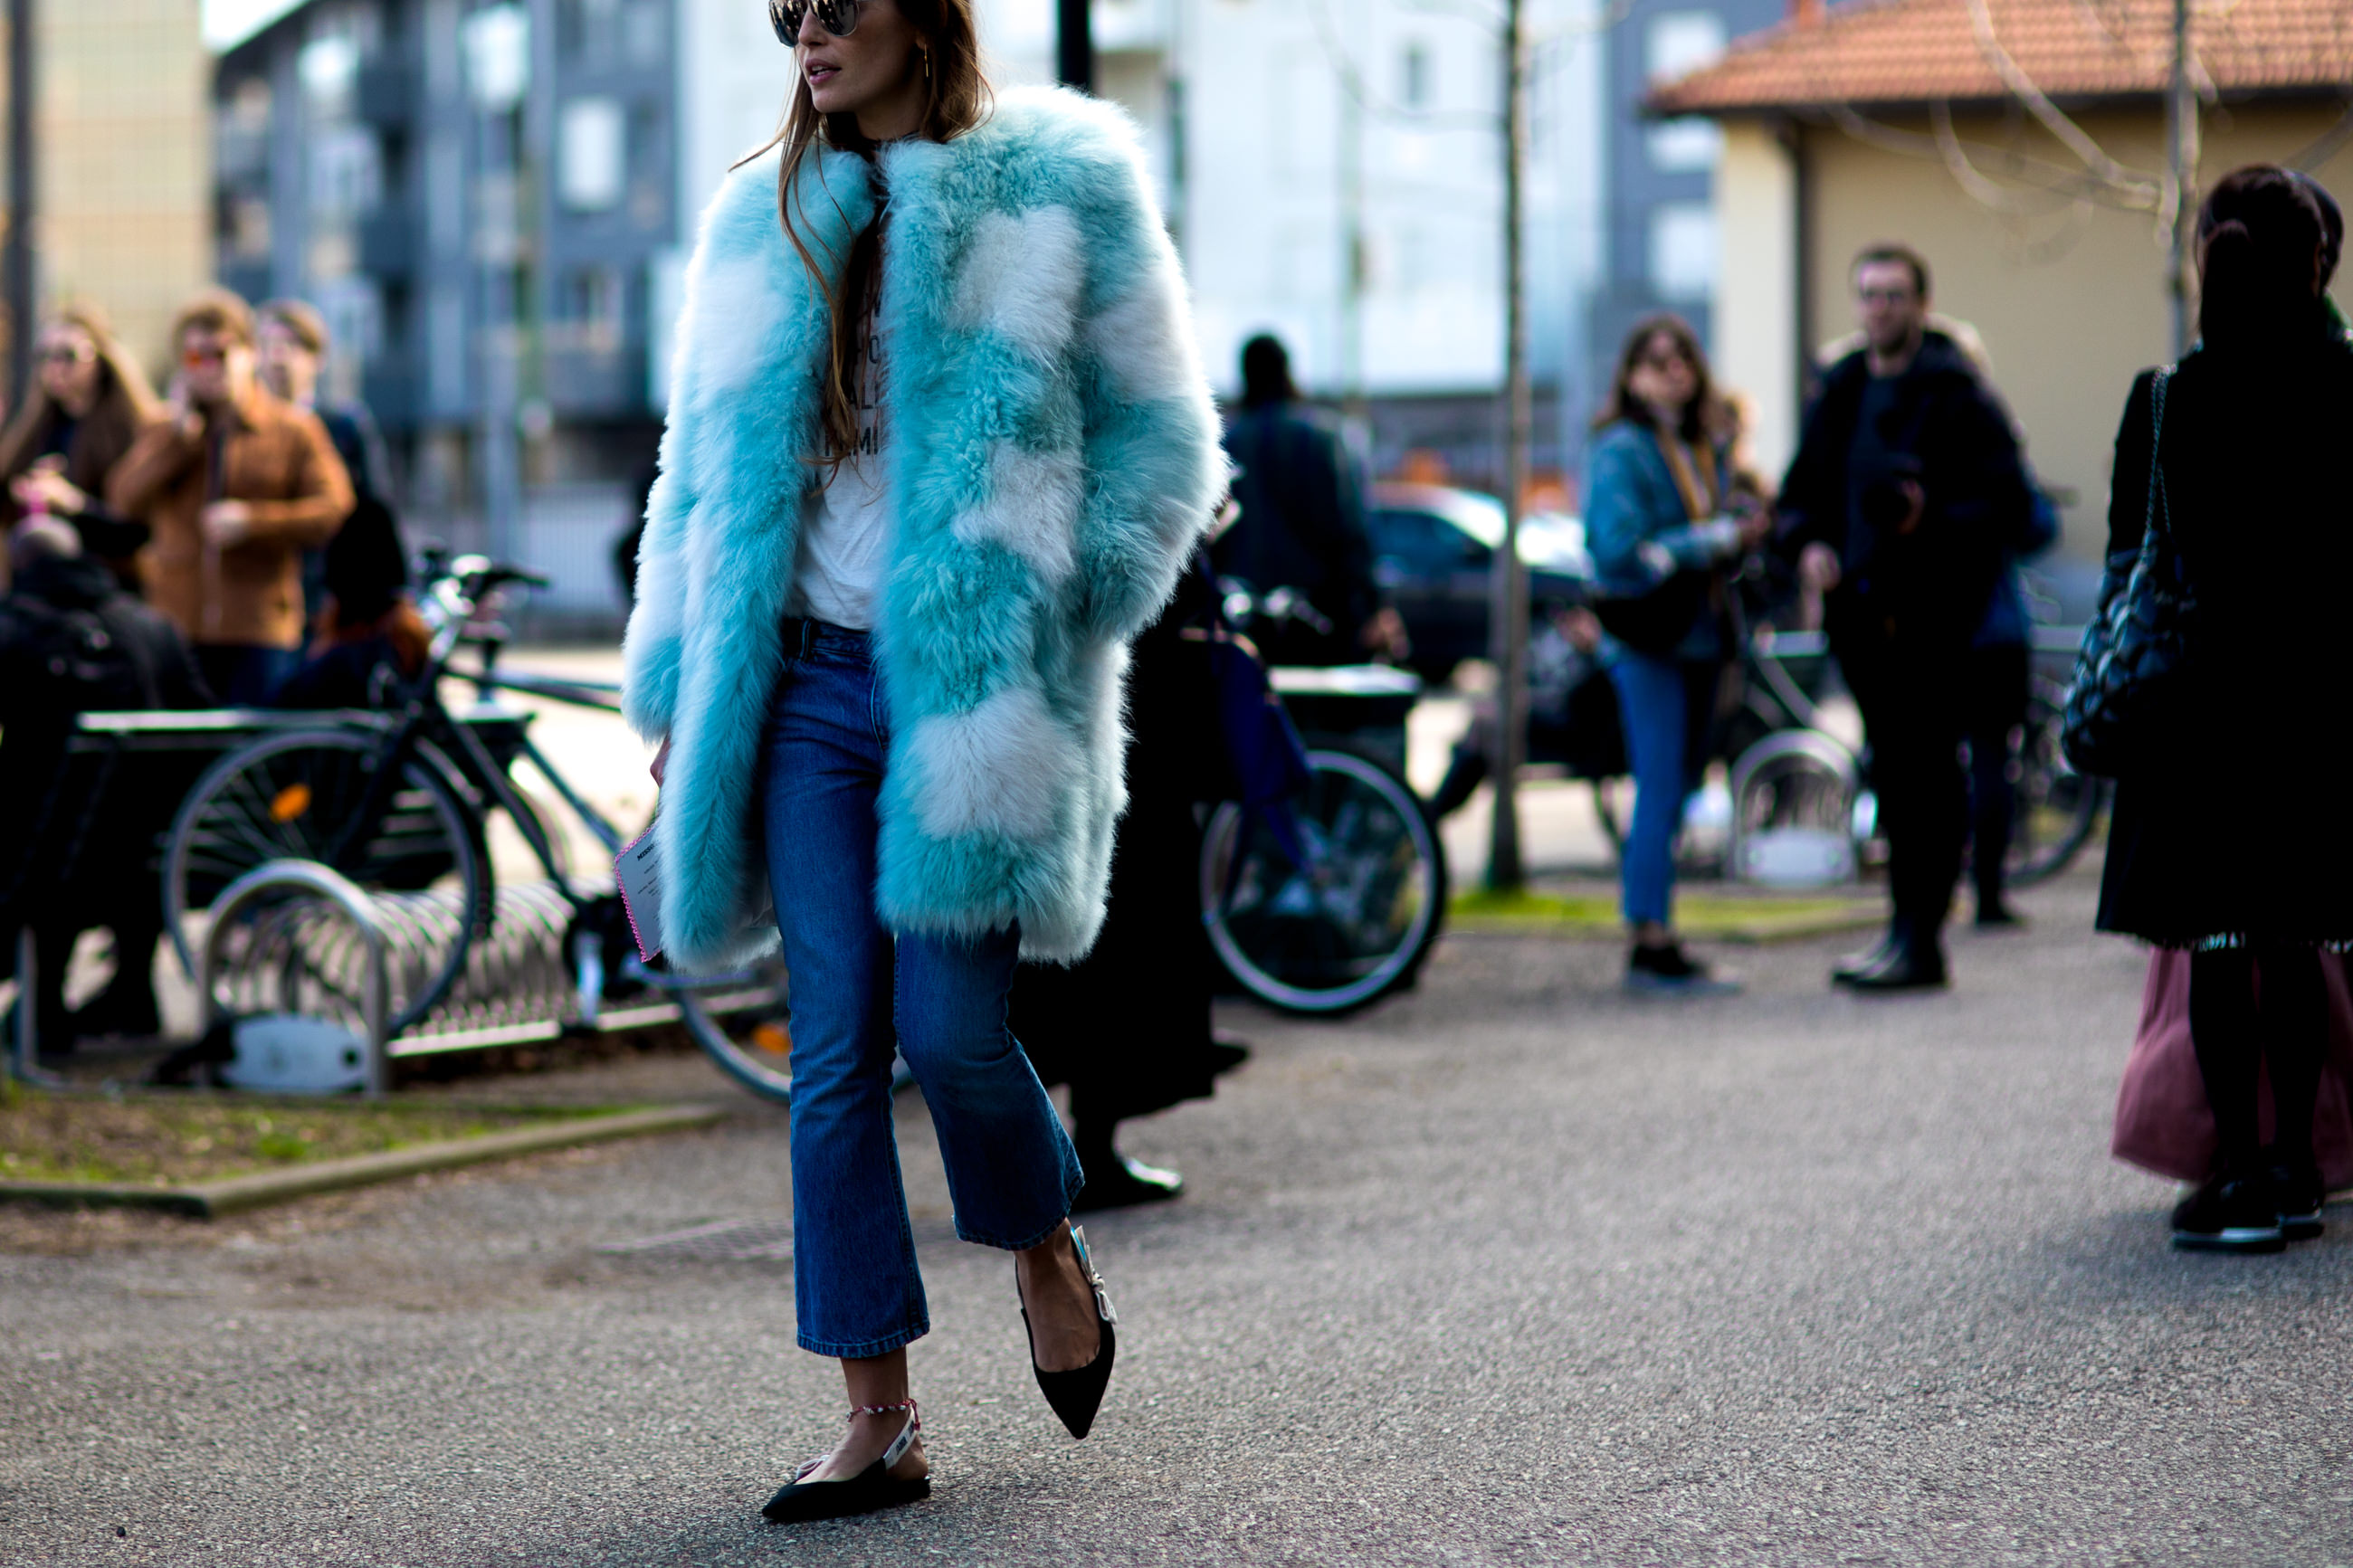 MFW FW17 Street Style: Carlotta Oddi wearing a blue fur coat, jeans and Dior pointy flats before a fashion show in Milan, Italy